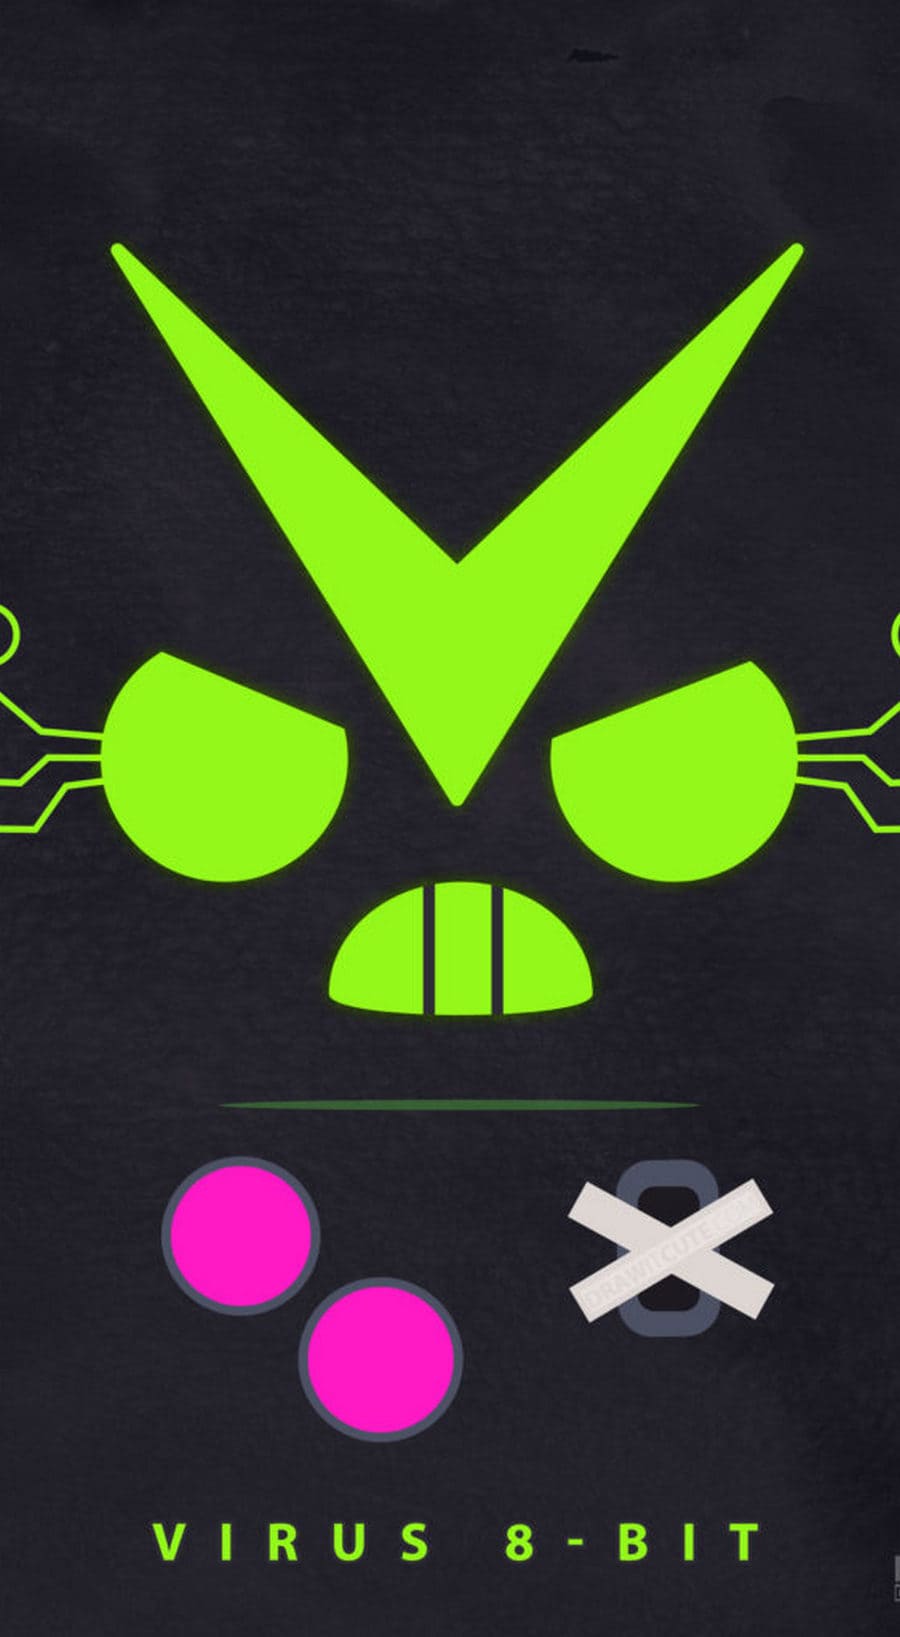 Brawl Stars Phone Wallpaper. Download Cool Image For Free